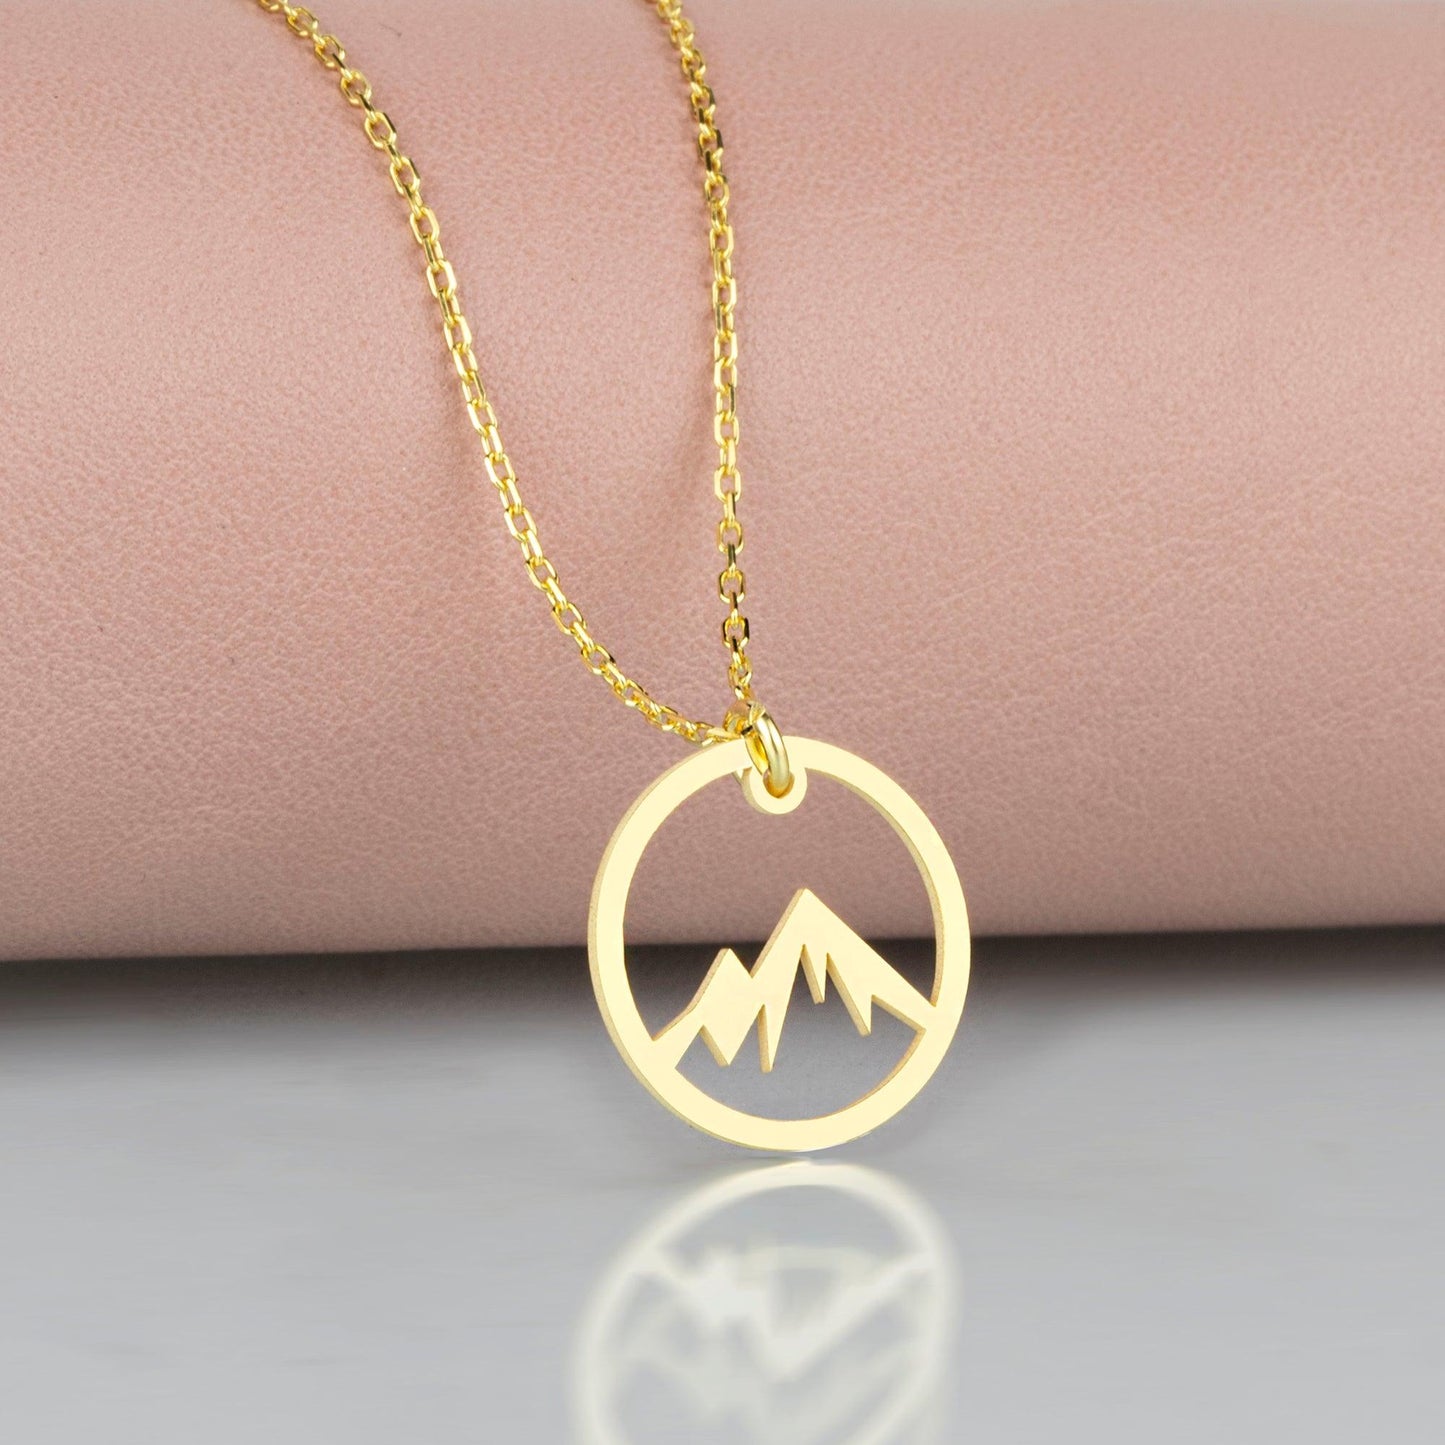 Mountain Necklace, Silver Mountain, Adventure Time, Wanderlust Necklace,Dainty Simple Necklace.